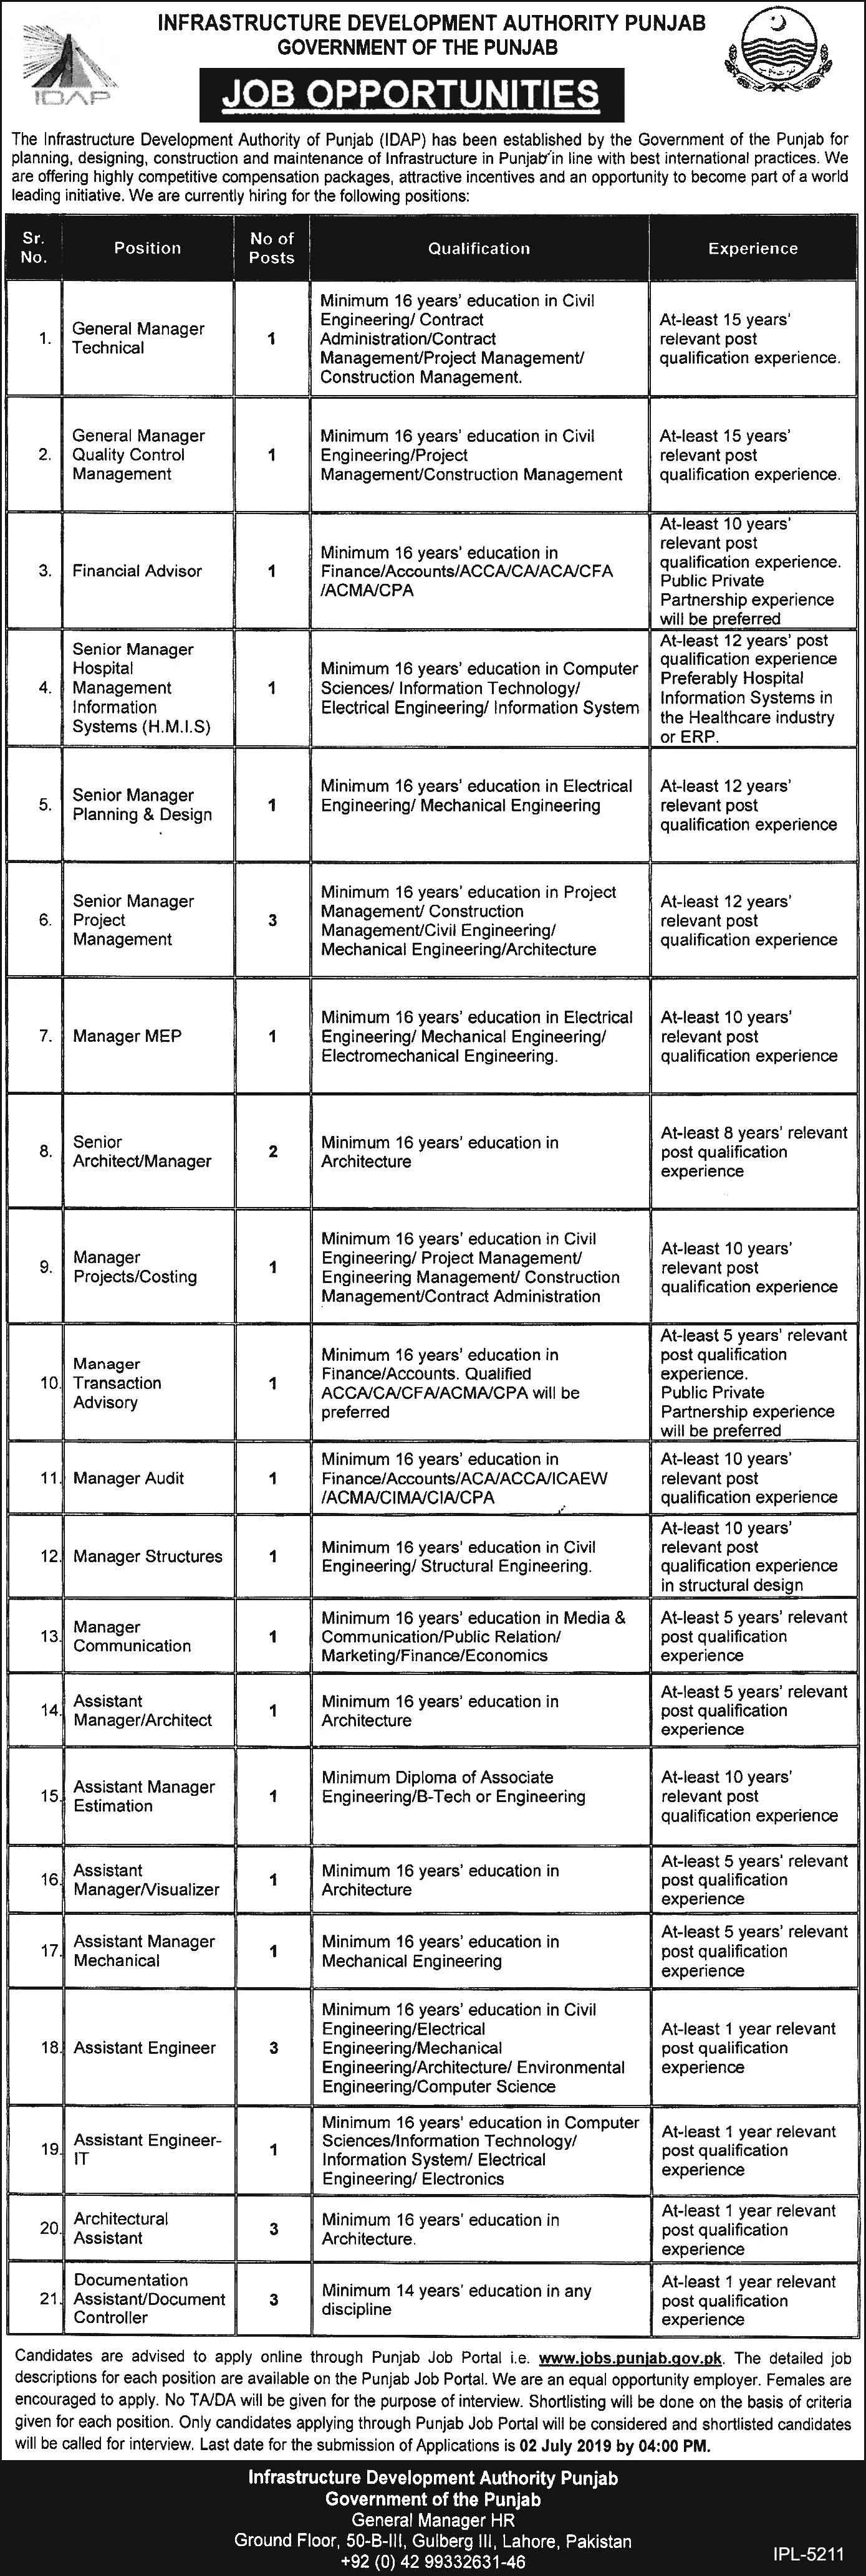 Infrastructure Development Authority Government of the Punjab jobs 2019